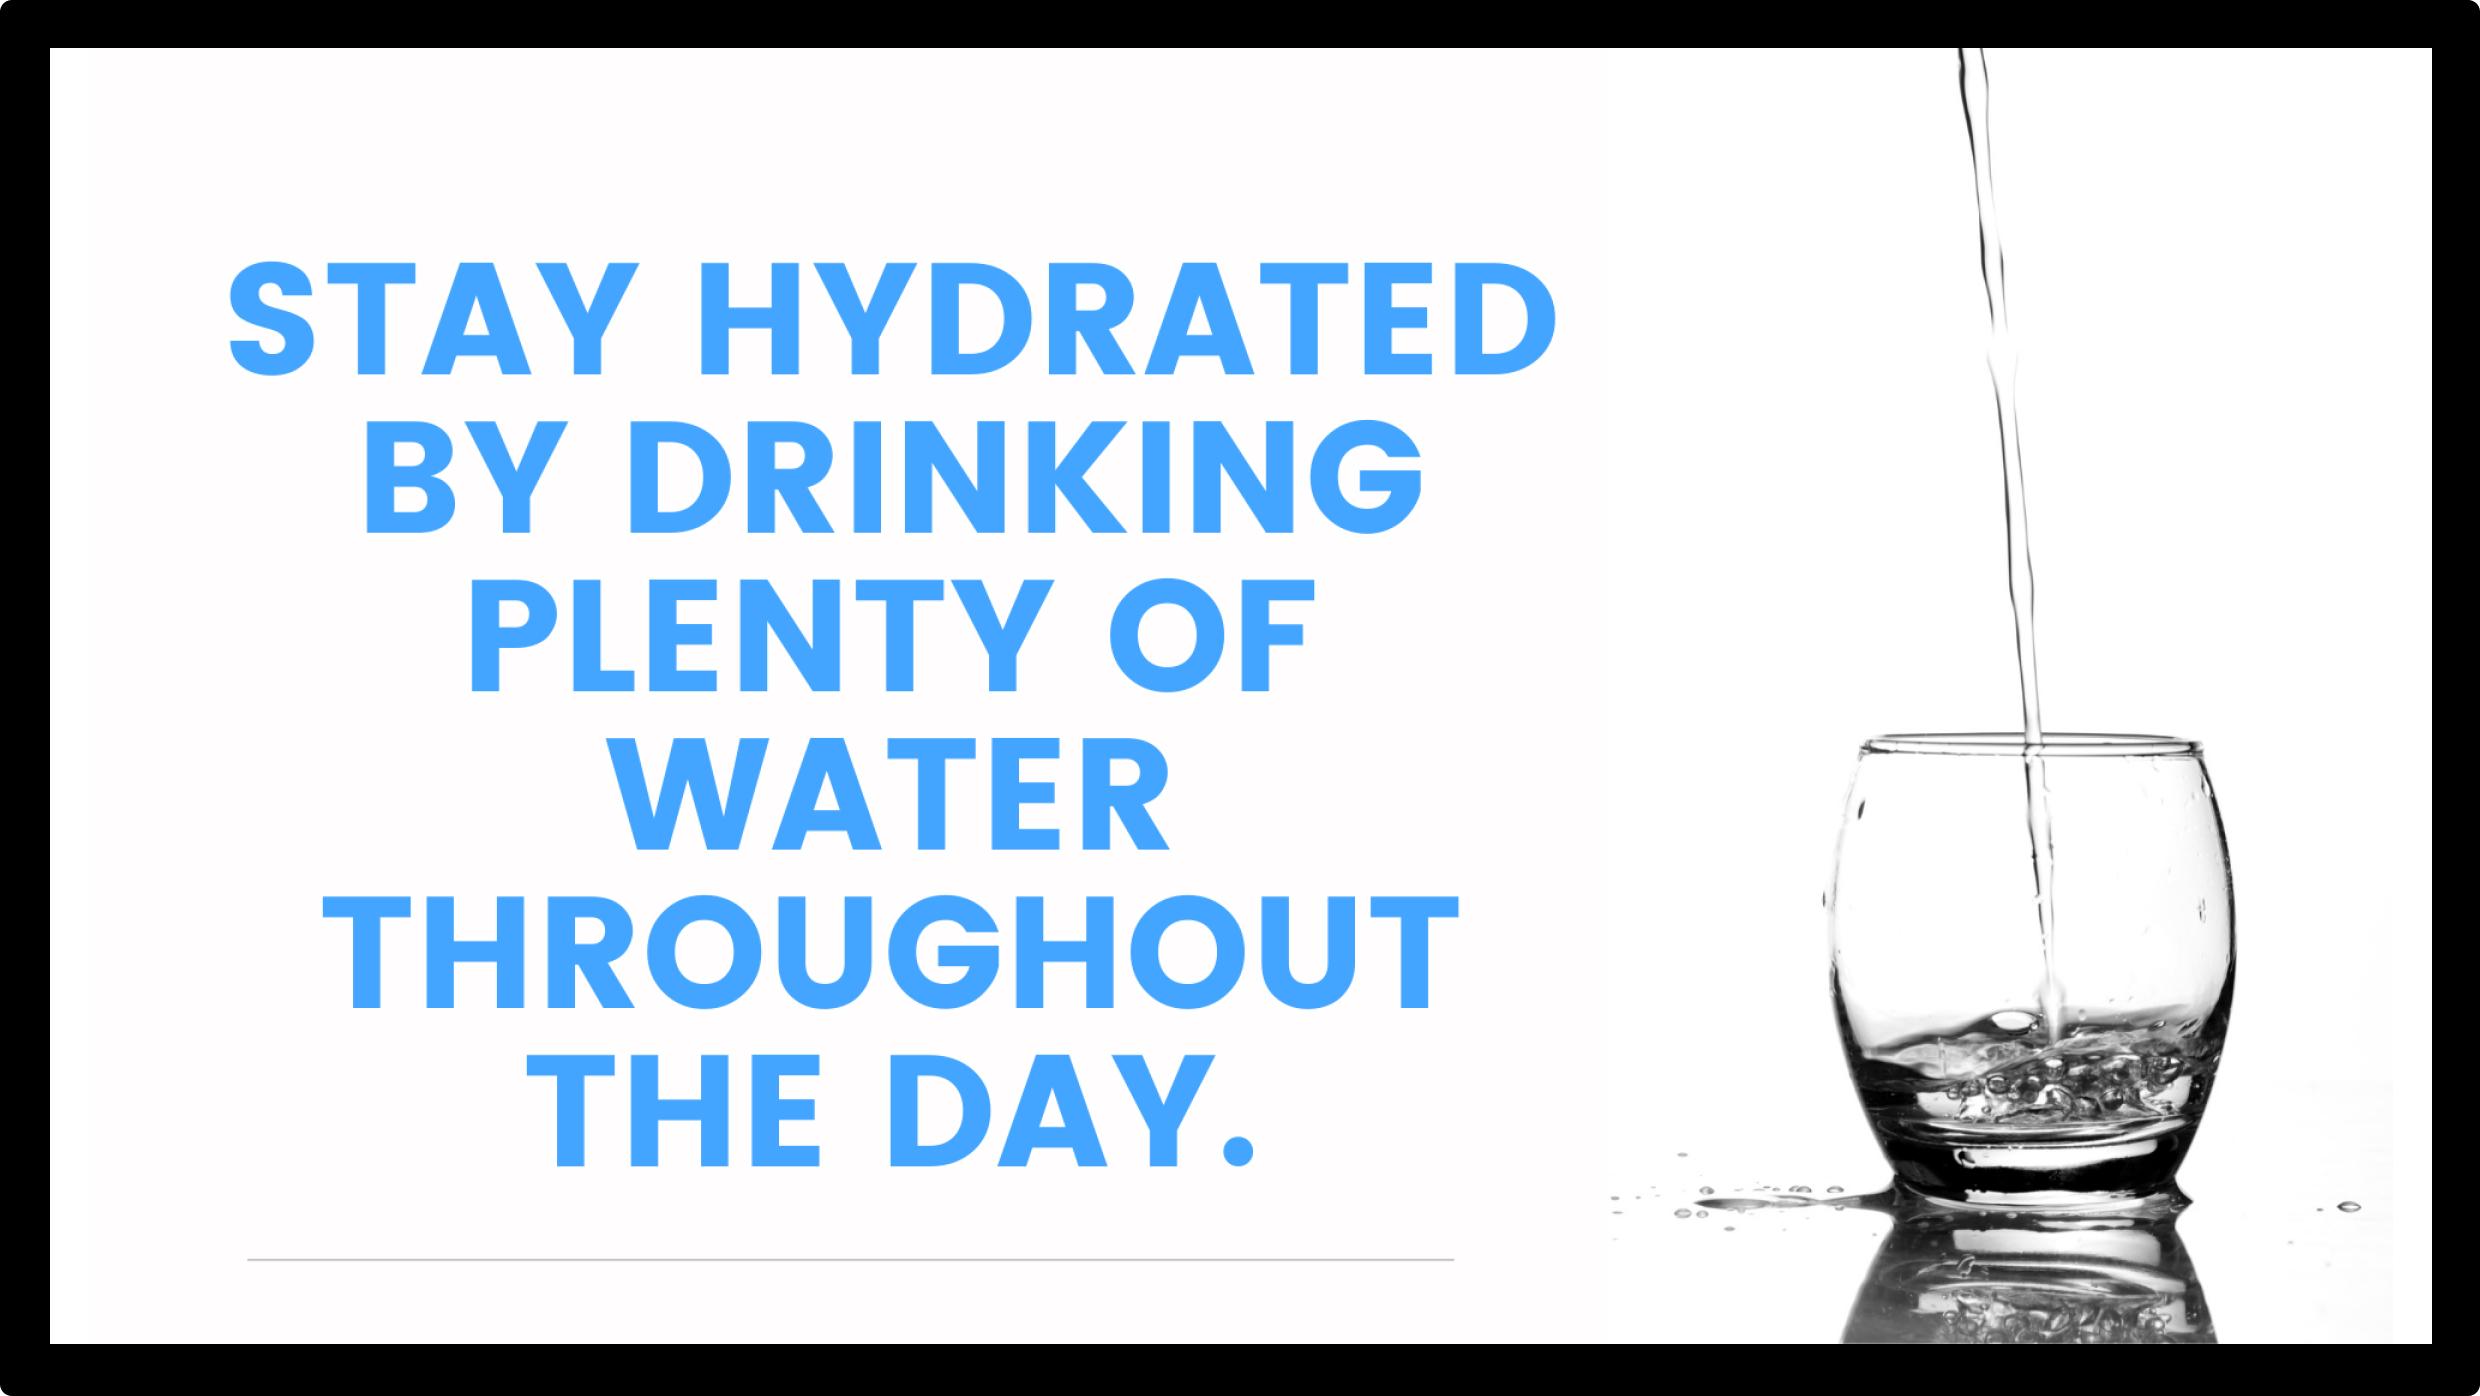 Screen example: Stay hydrated by drinking plenty of water throughout the day